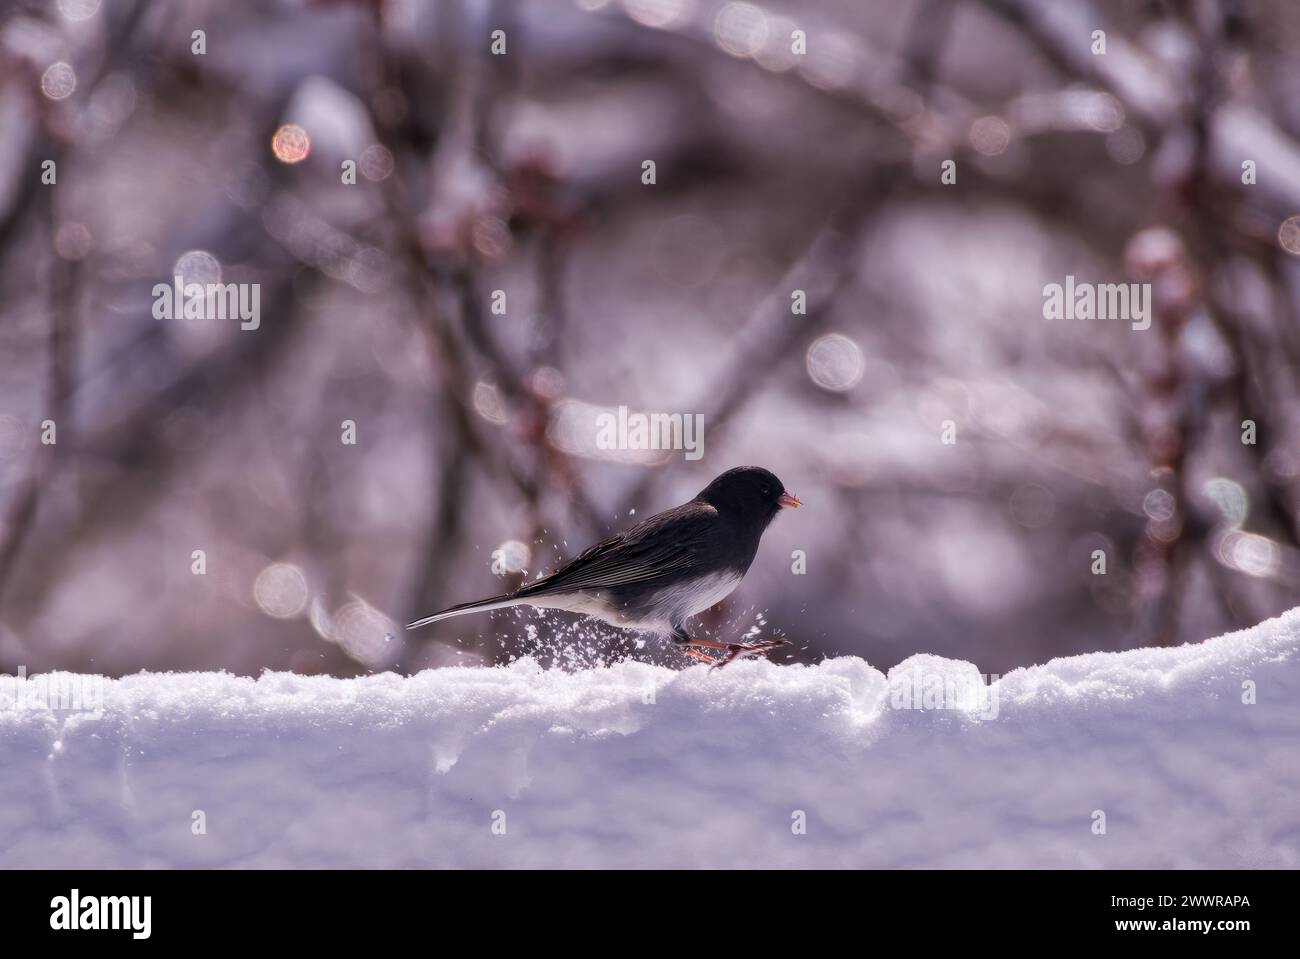 A Dark-eyed Junco perched on snowy hilltop Stock Photo